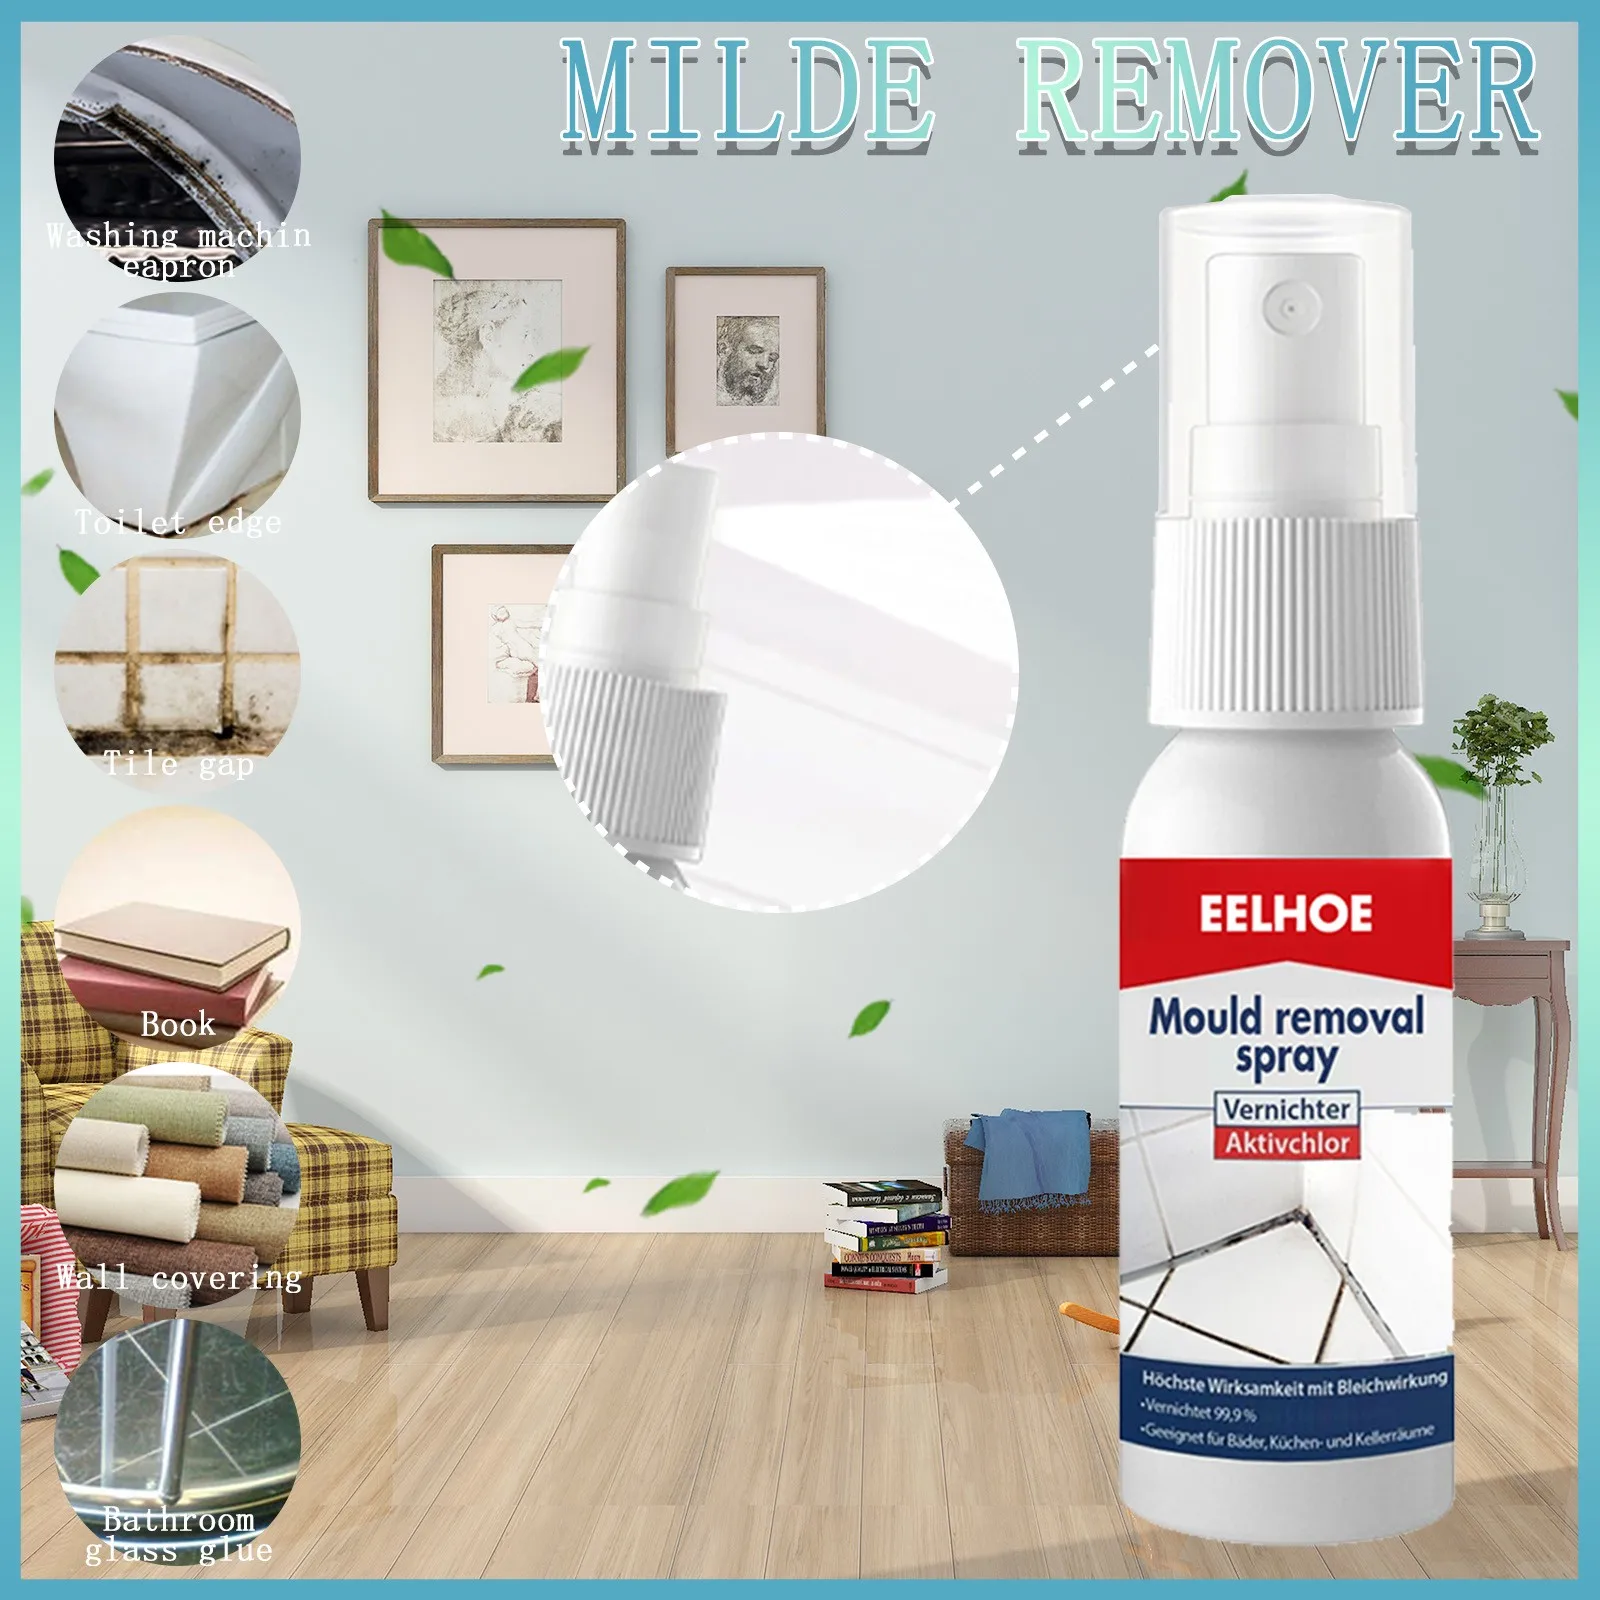 HMK® R160 Moss and Mildew Remover Spray for Natural Stone.  ›Essential-natural-stone-cleaner